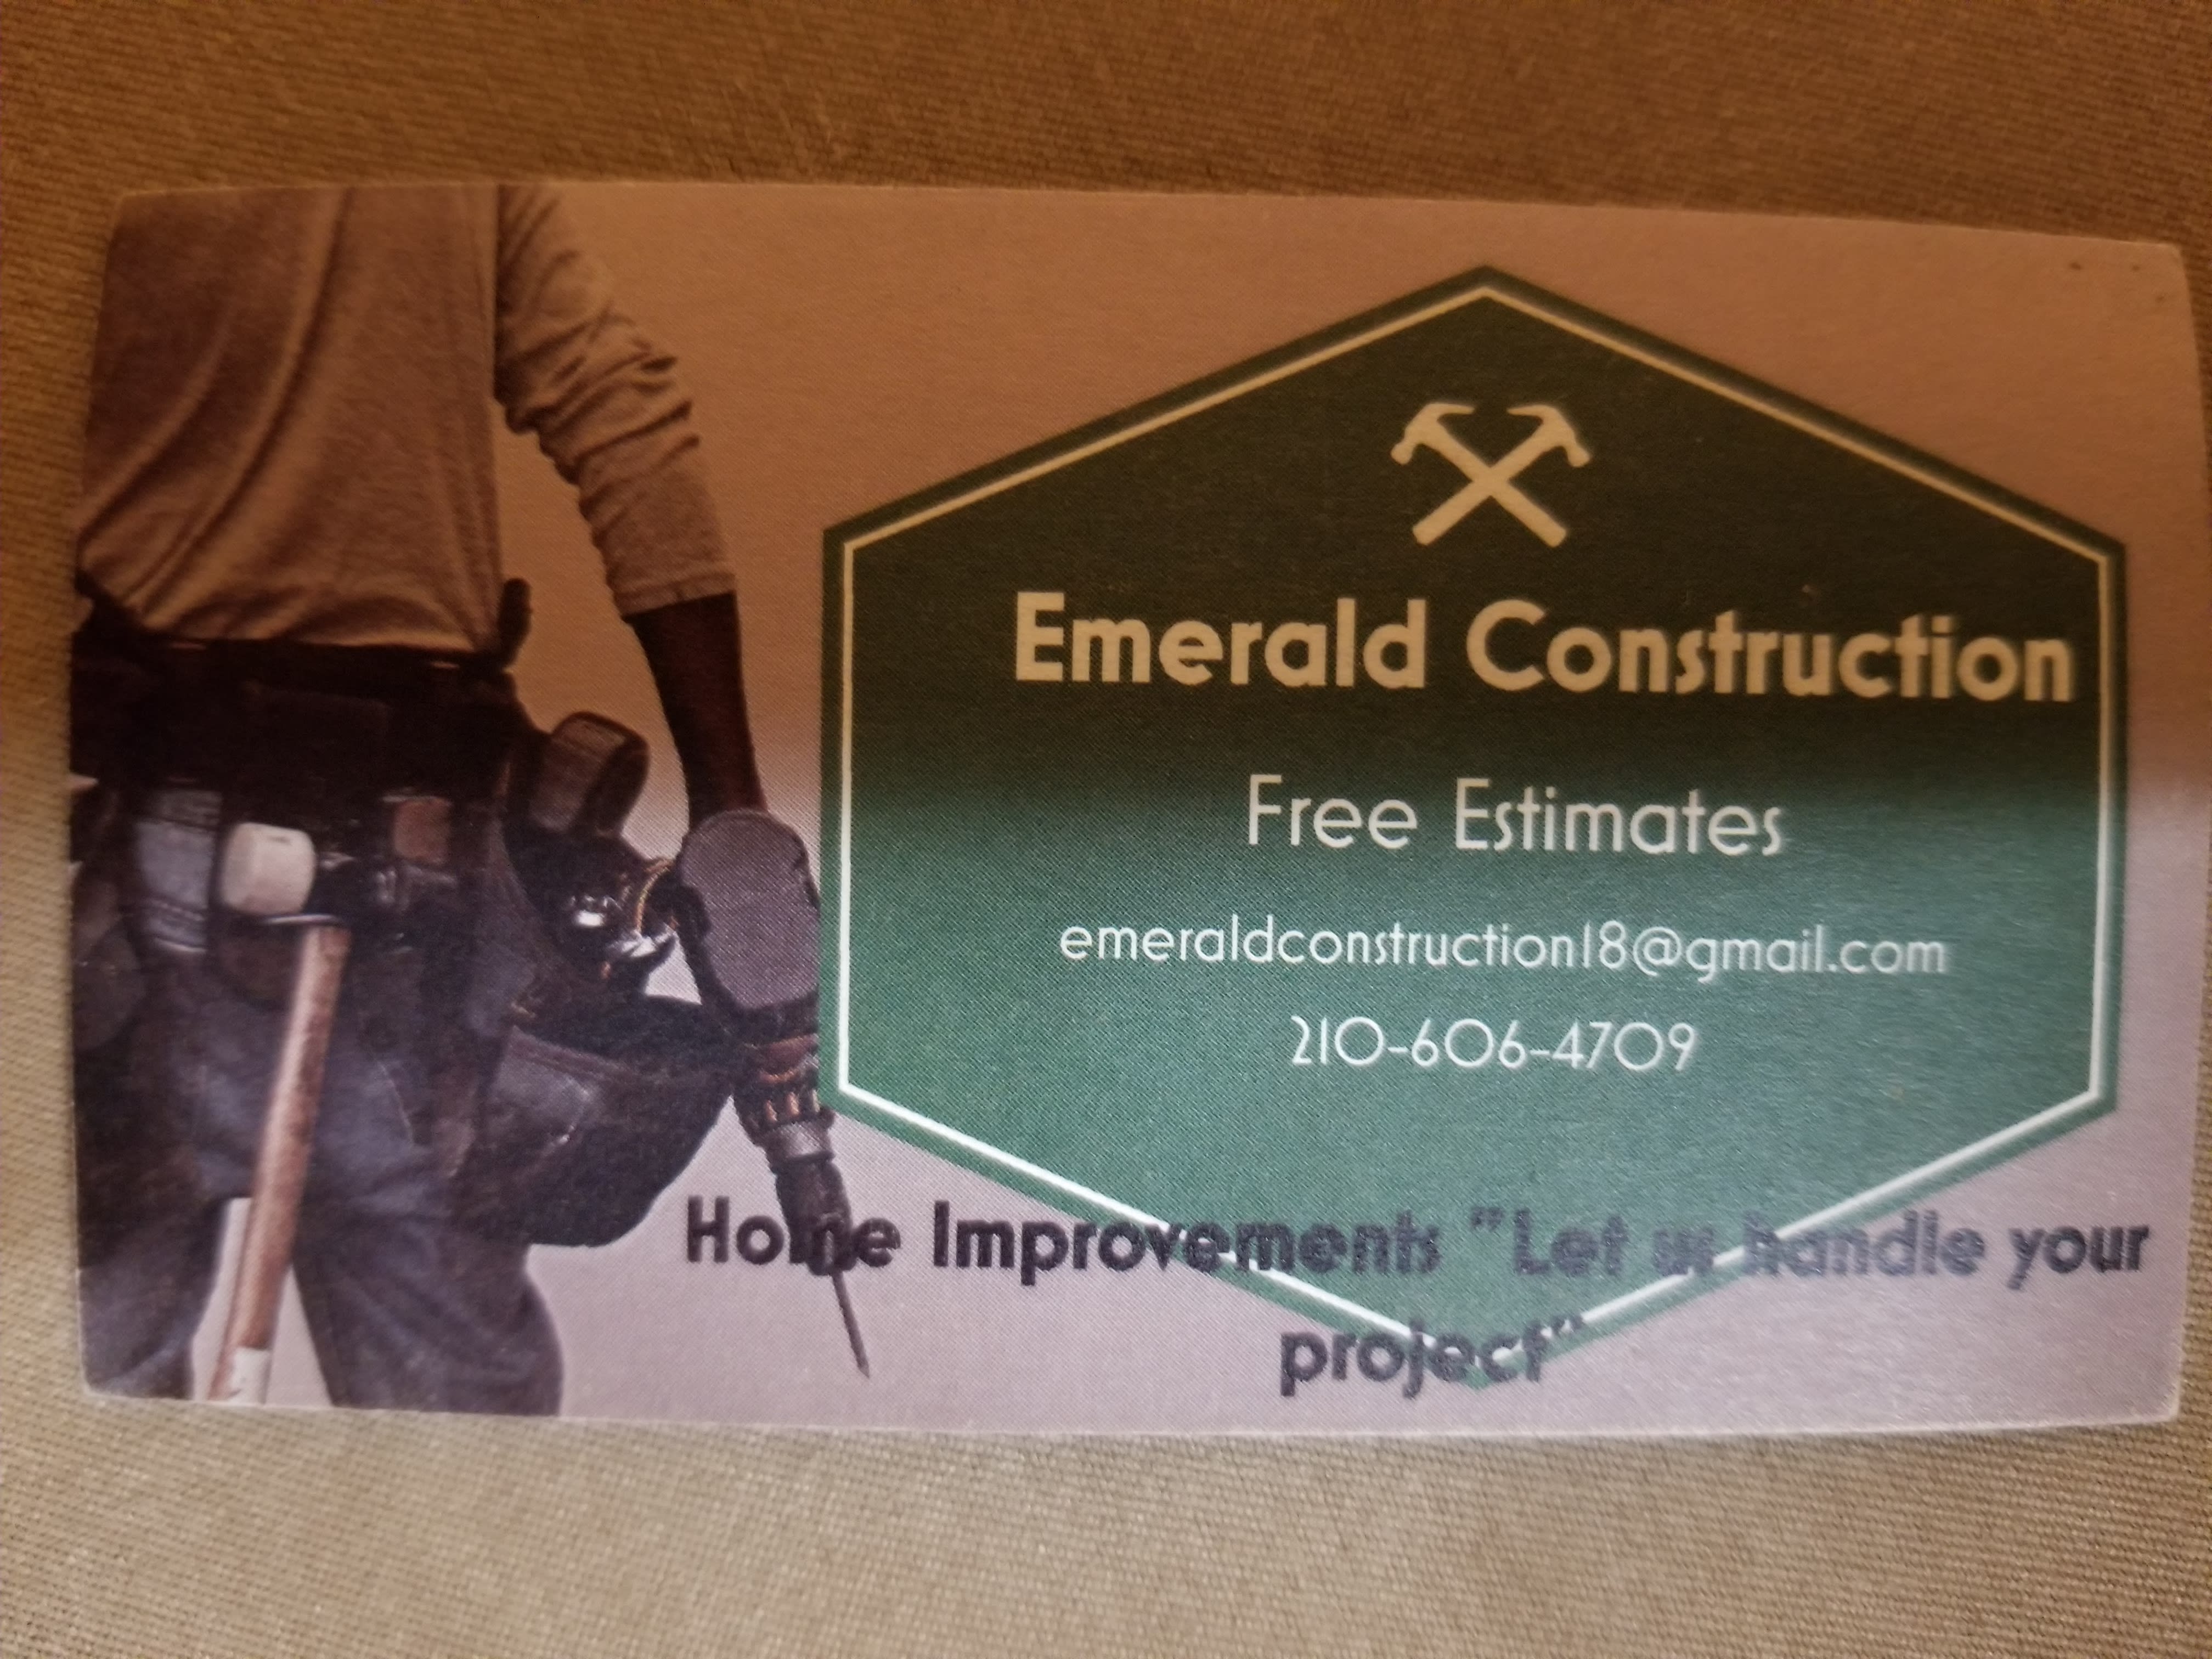 Emerald Construction & Remodeling